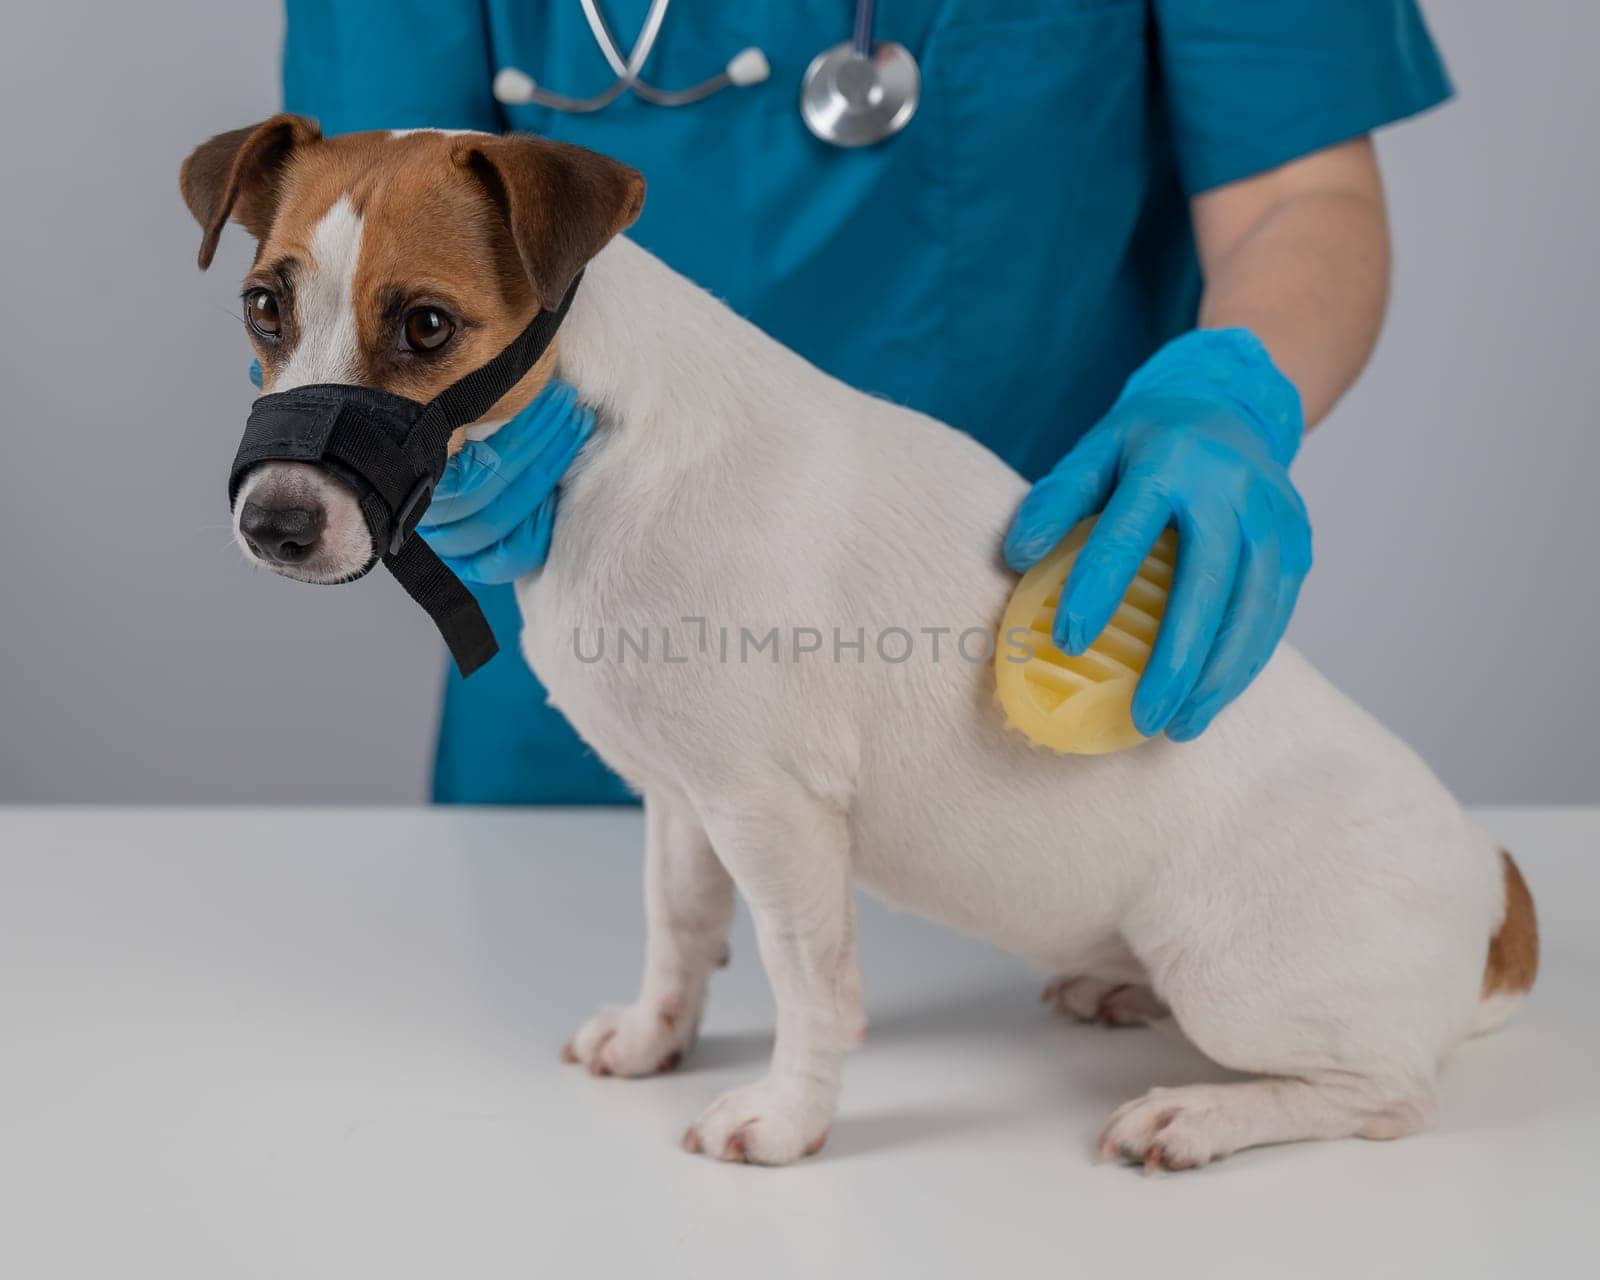 A veterinarian brushes a dog with a silicone brush. Jack Russell Terrier in a muzzle during grooming. by mrwed54